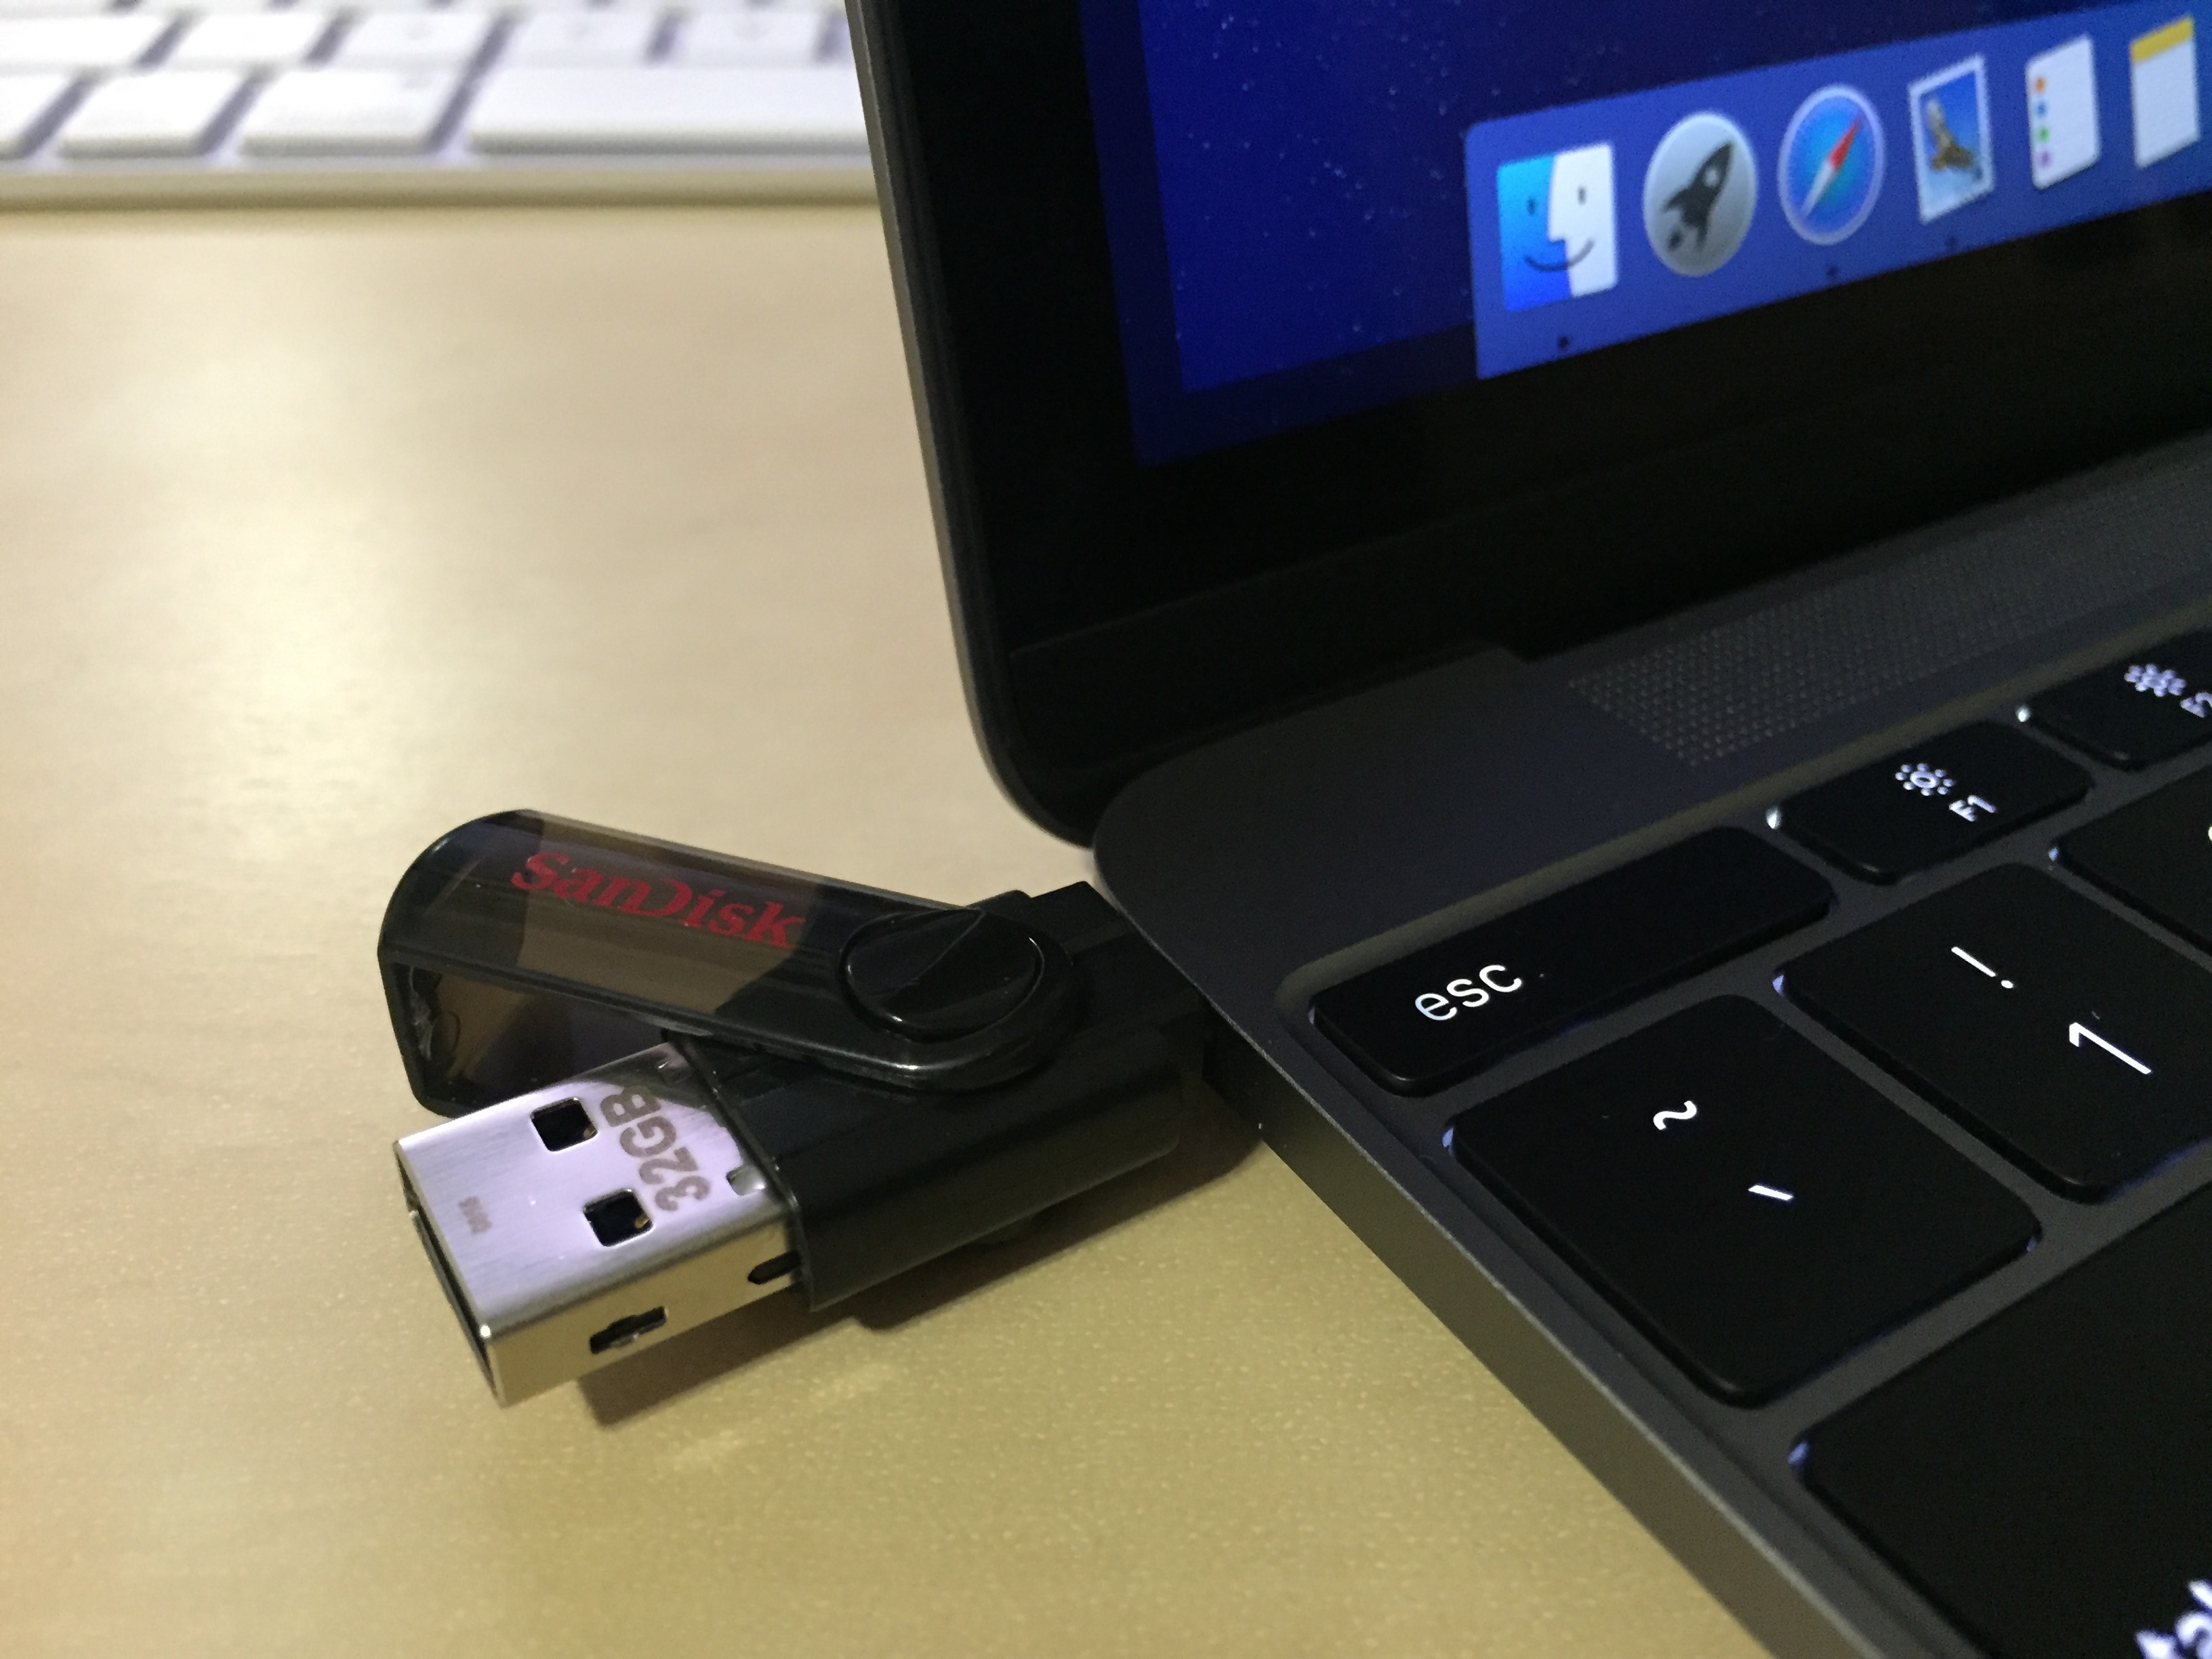 how to transfer photos from macbook to flash drive